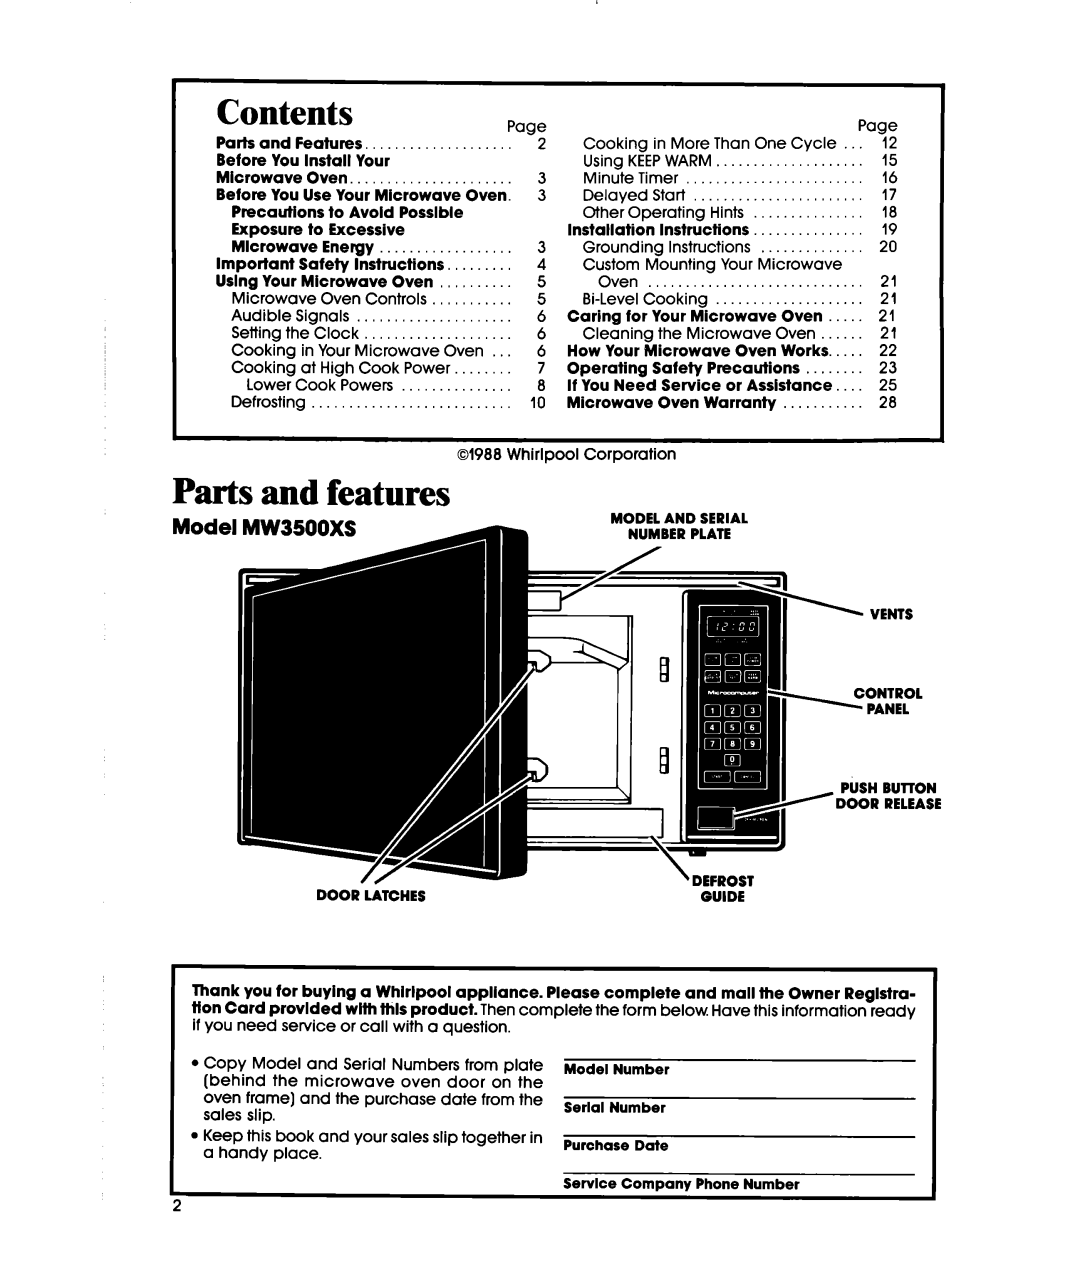 Whirlpool MW3500XS manual Parts and features, Contents 